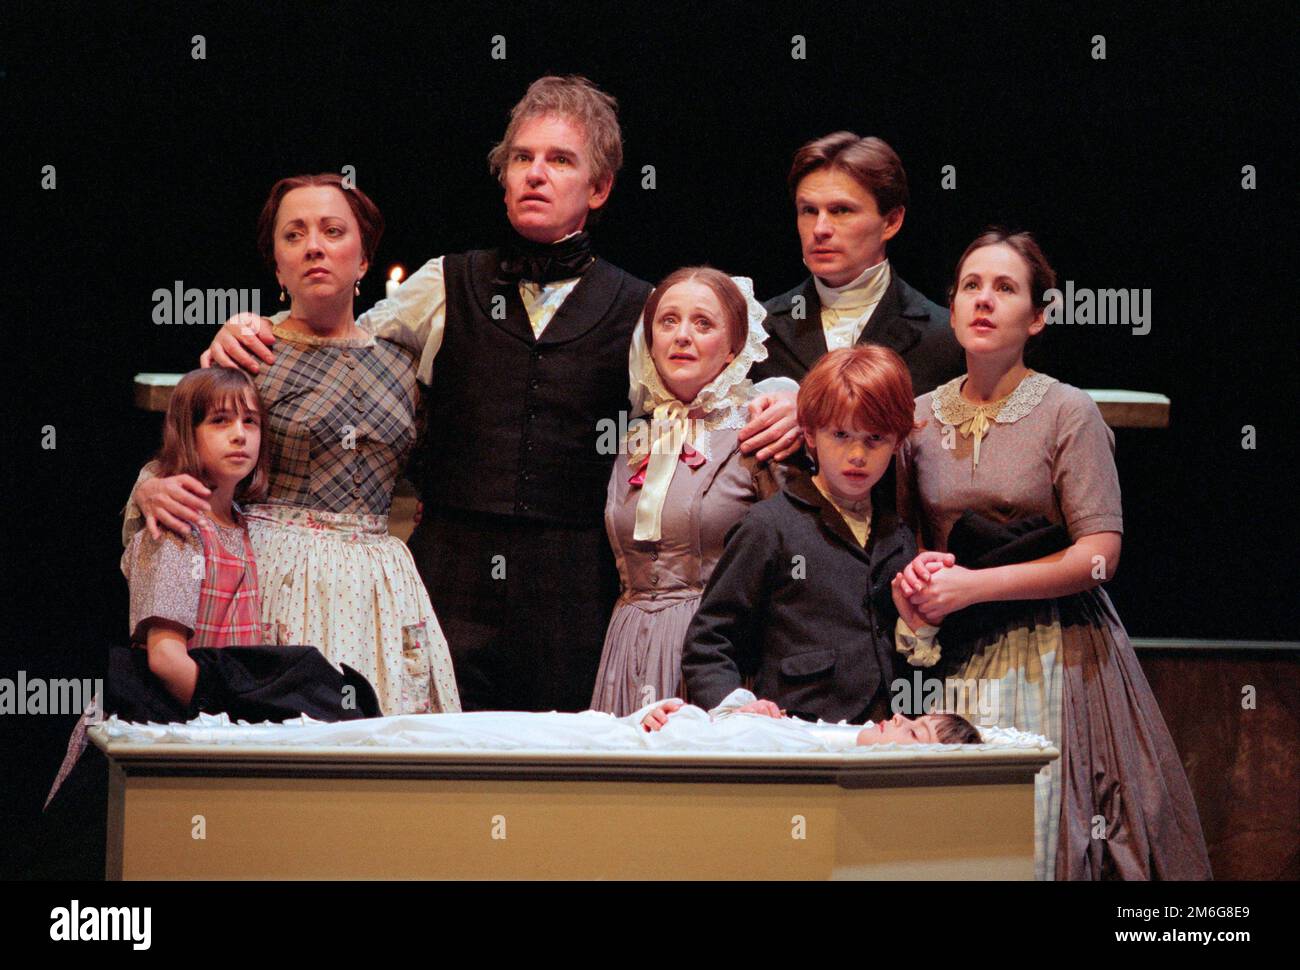 mourning Tiny Tim - rear, l-r: Sara Weymouth (Martha), Polly James (Mrs Cratchit), Paul Greenwood (Bob Cratchit), Roger Moss (Peter), Vicky Blake (Belinda) in A CHRISTMAS CAROL by Charles Dickens at the Royal Shakespeare Company (RSC), Barbican Theatre, Barbican Centre, London EC2  07/12/1995   adapted by John Mortimer  music: Nigel Hess  set design: John Gunter  costumes: Deirdre Clancy  lighting: Nigel Levings  choreography: Lindsay Dolan  director: Ian Judge Stock Photo